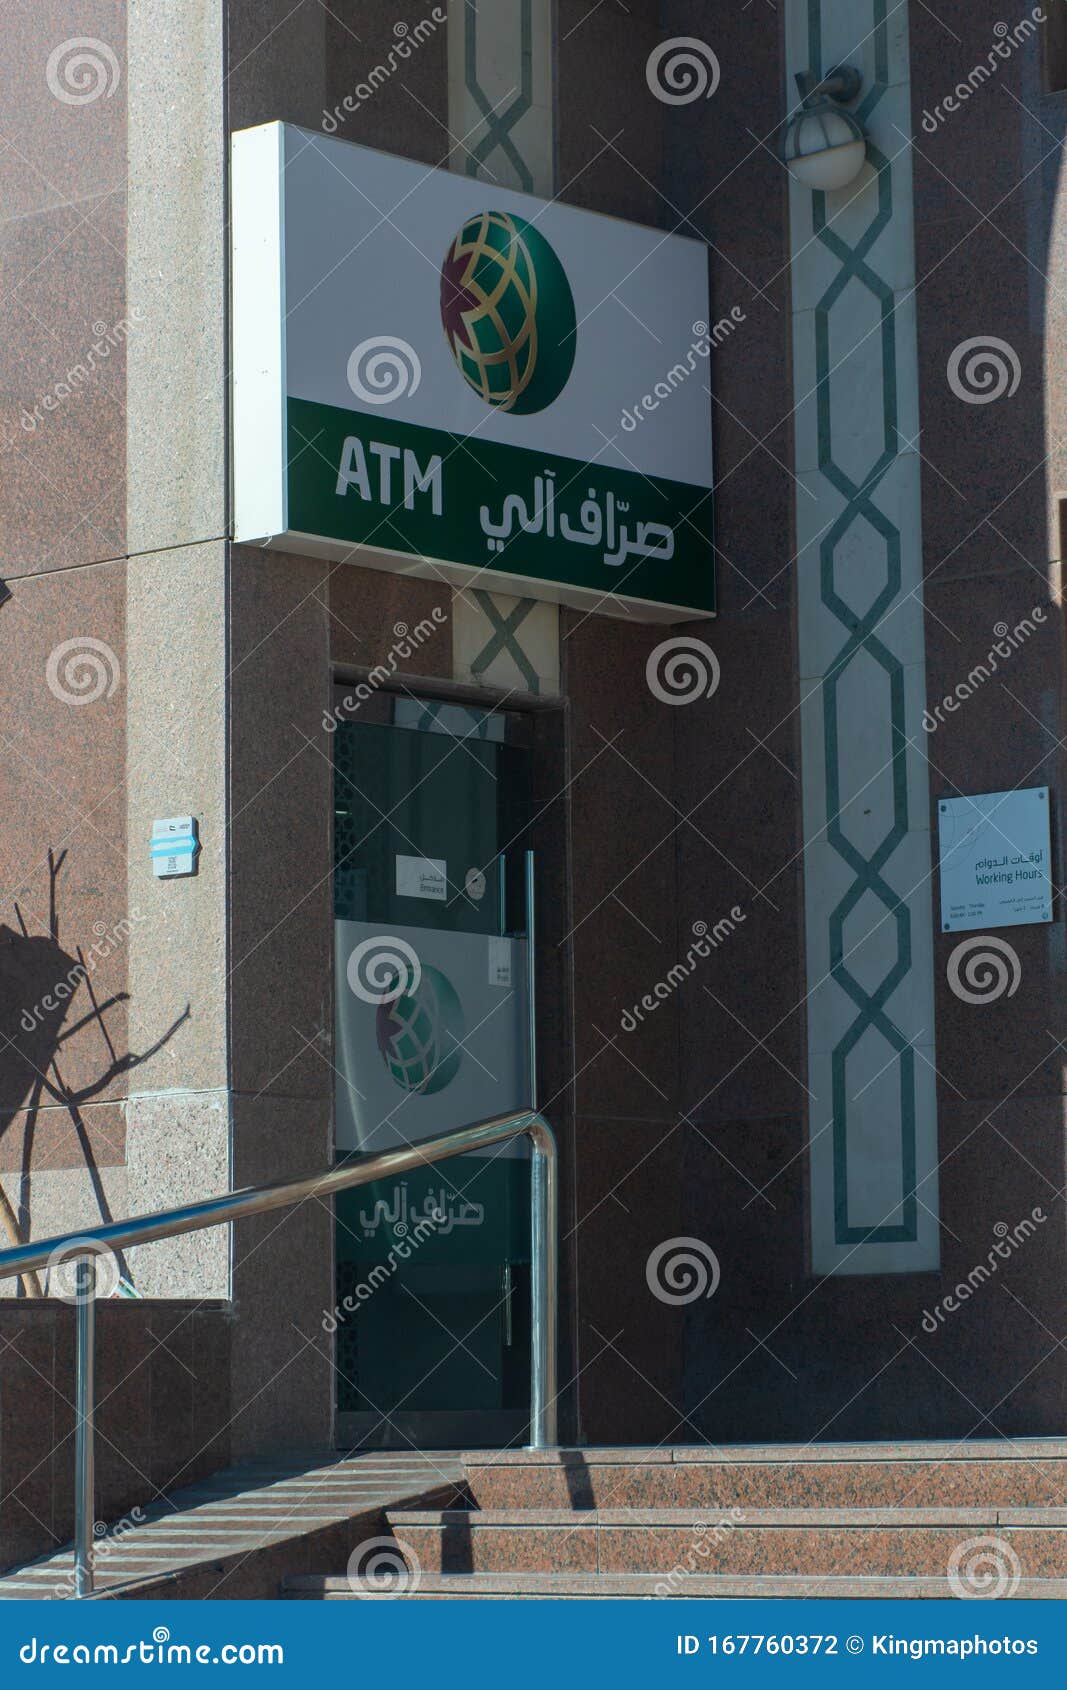 Bank atm operating hours